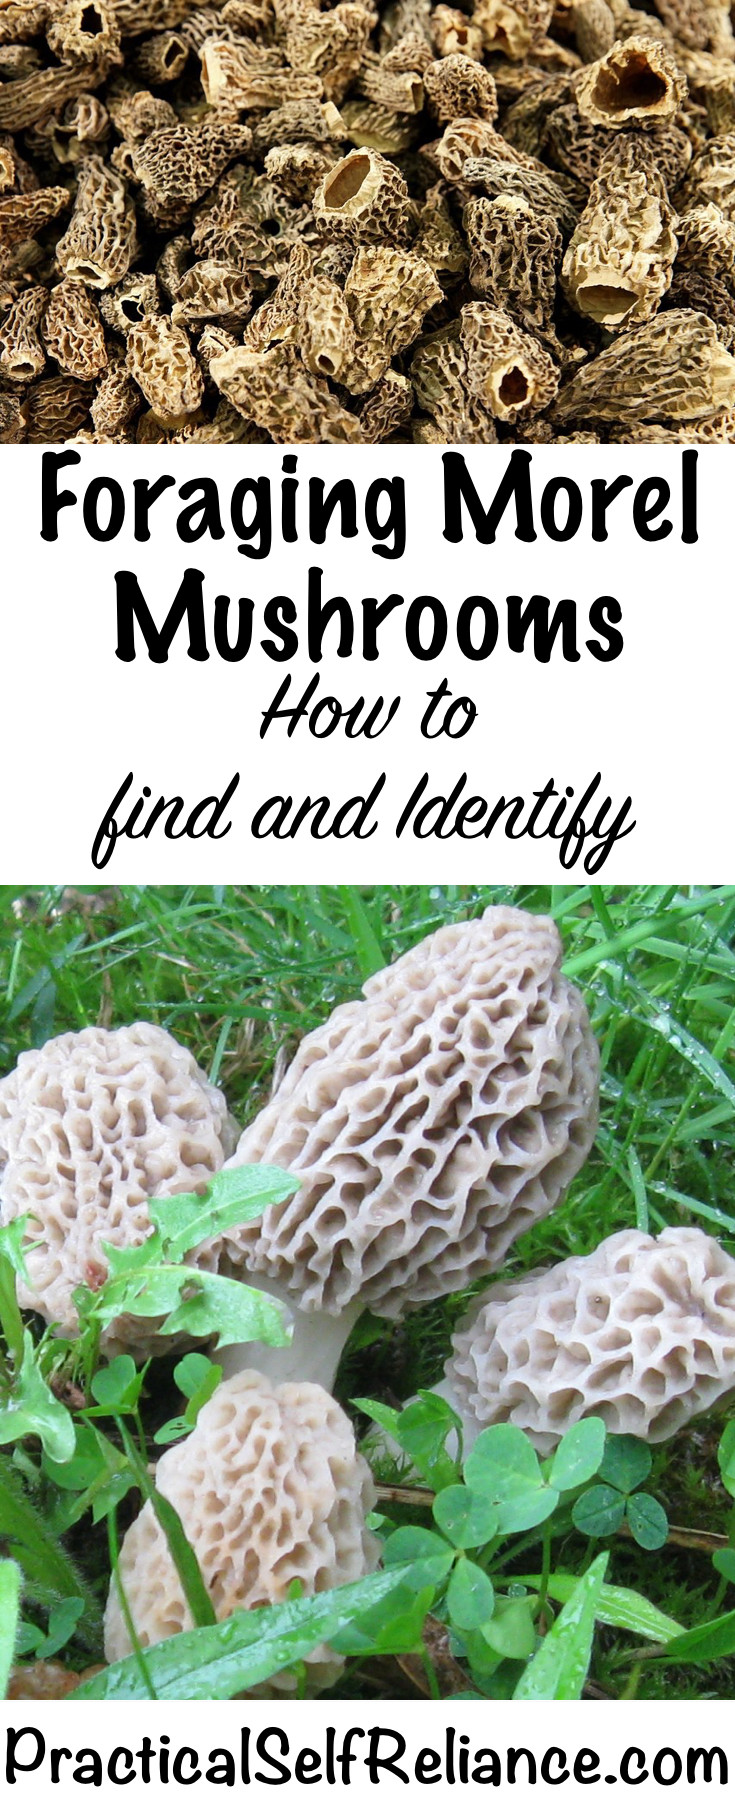 Best Places To Look For Morel Mushrooms
 Morel Mushrooms How to Find and Identify Morels